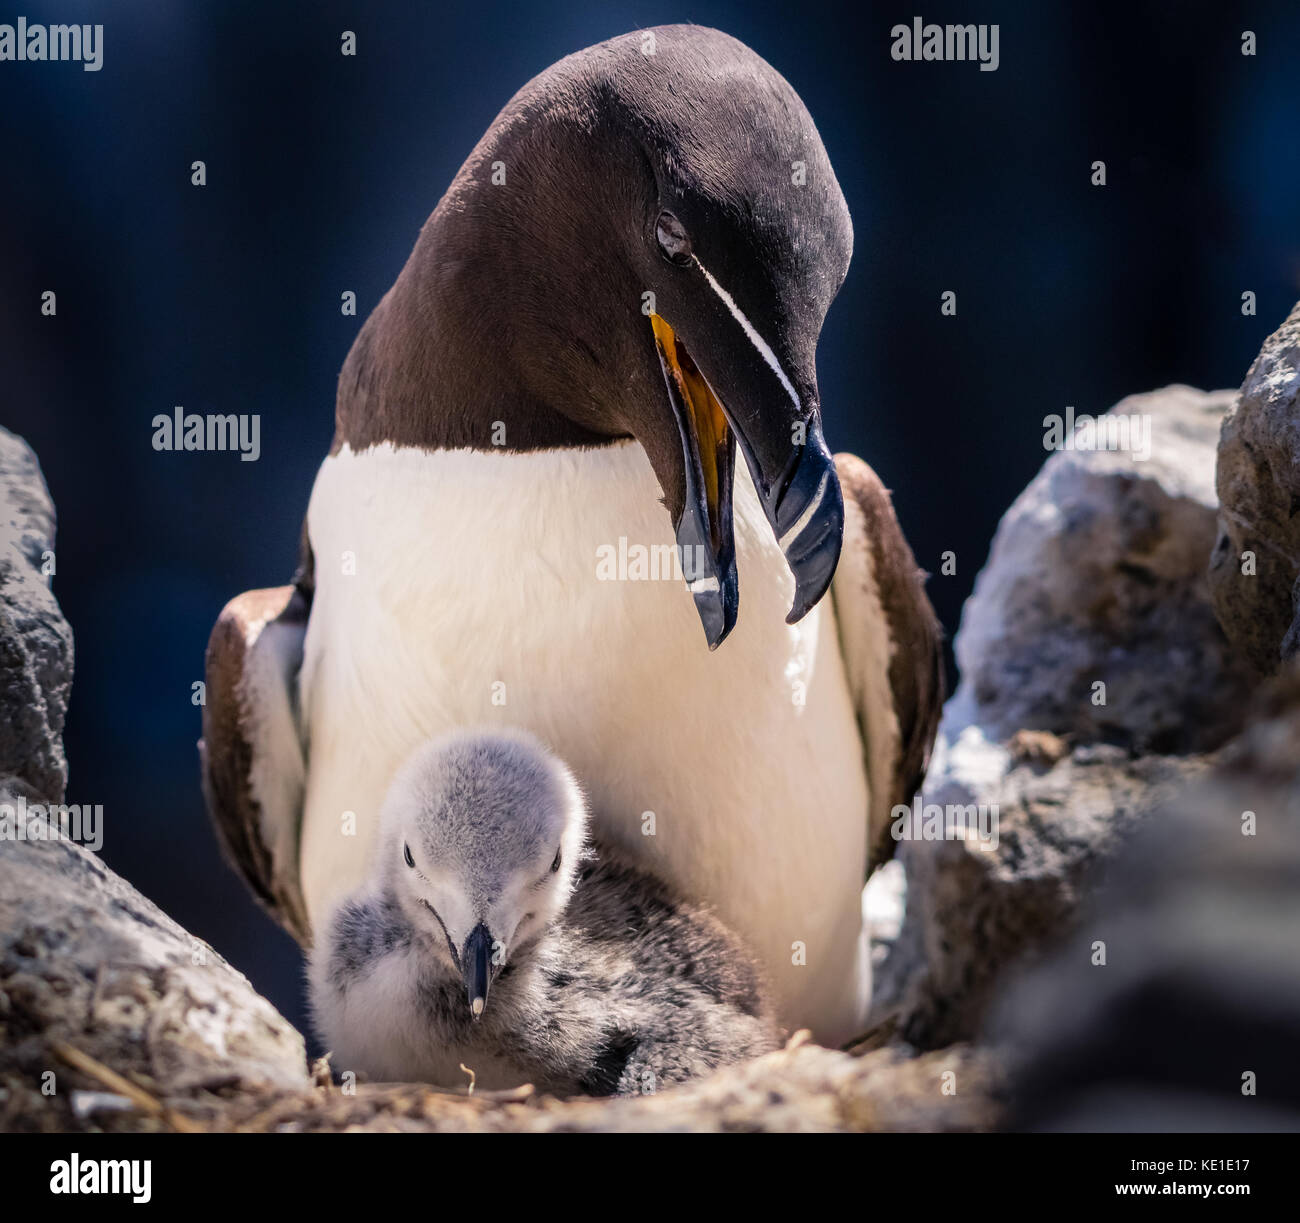 Razorbill (Alca torda) is a colonial seabird that comes to land only to breed. It chooses one partner for life and females lay just one egg per year.R Stock Photo